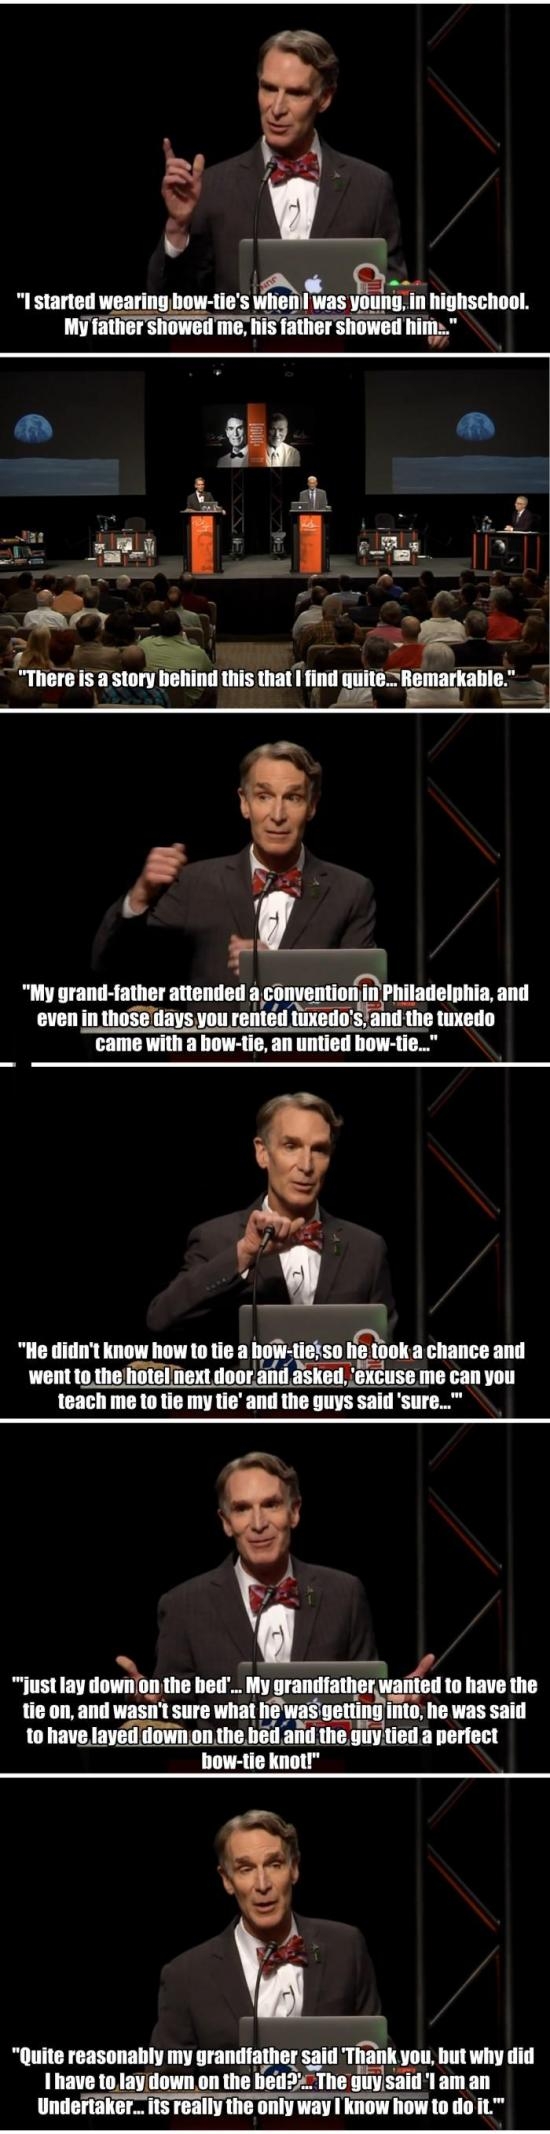 When Bill Nye started wearing bow ties.